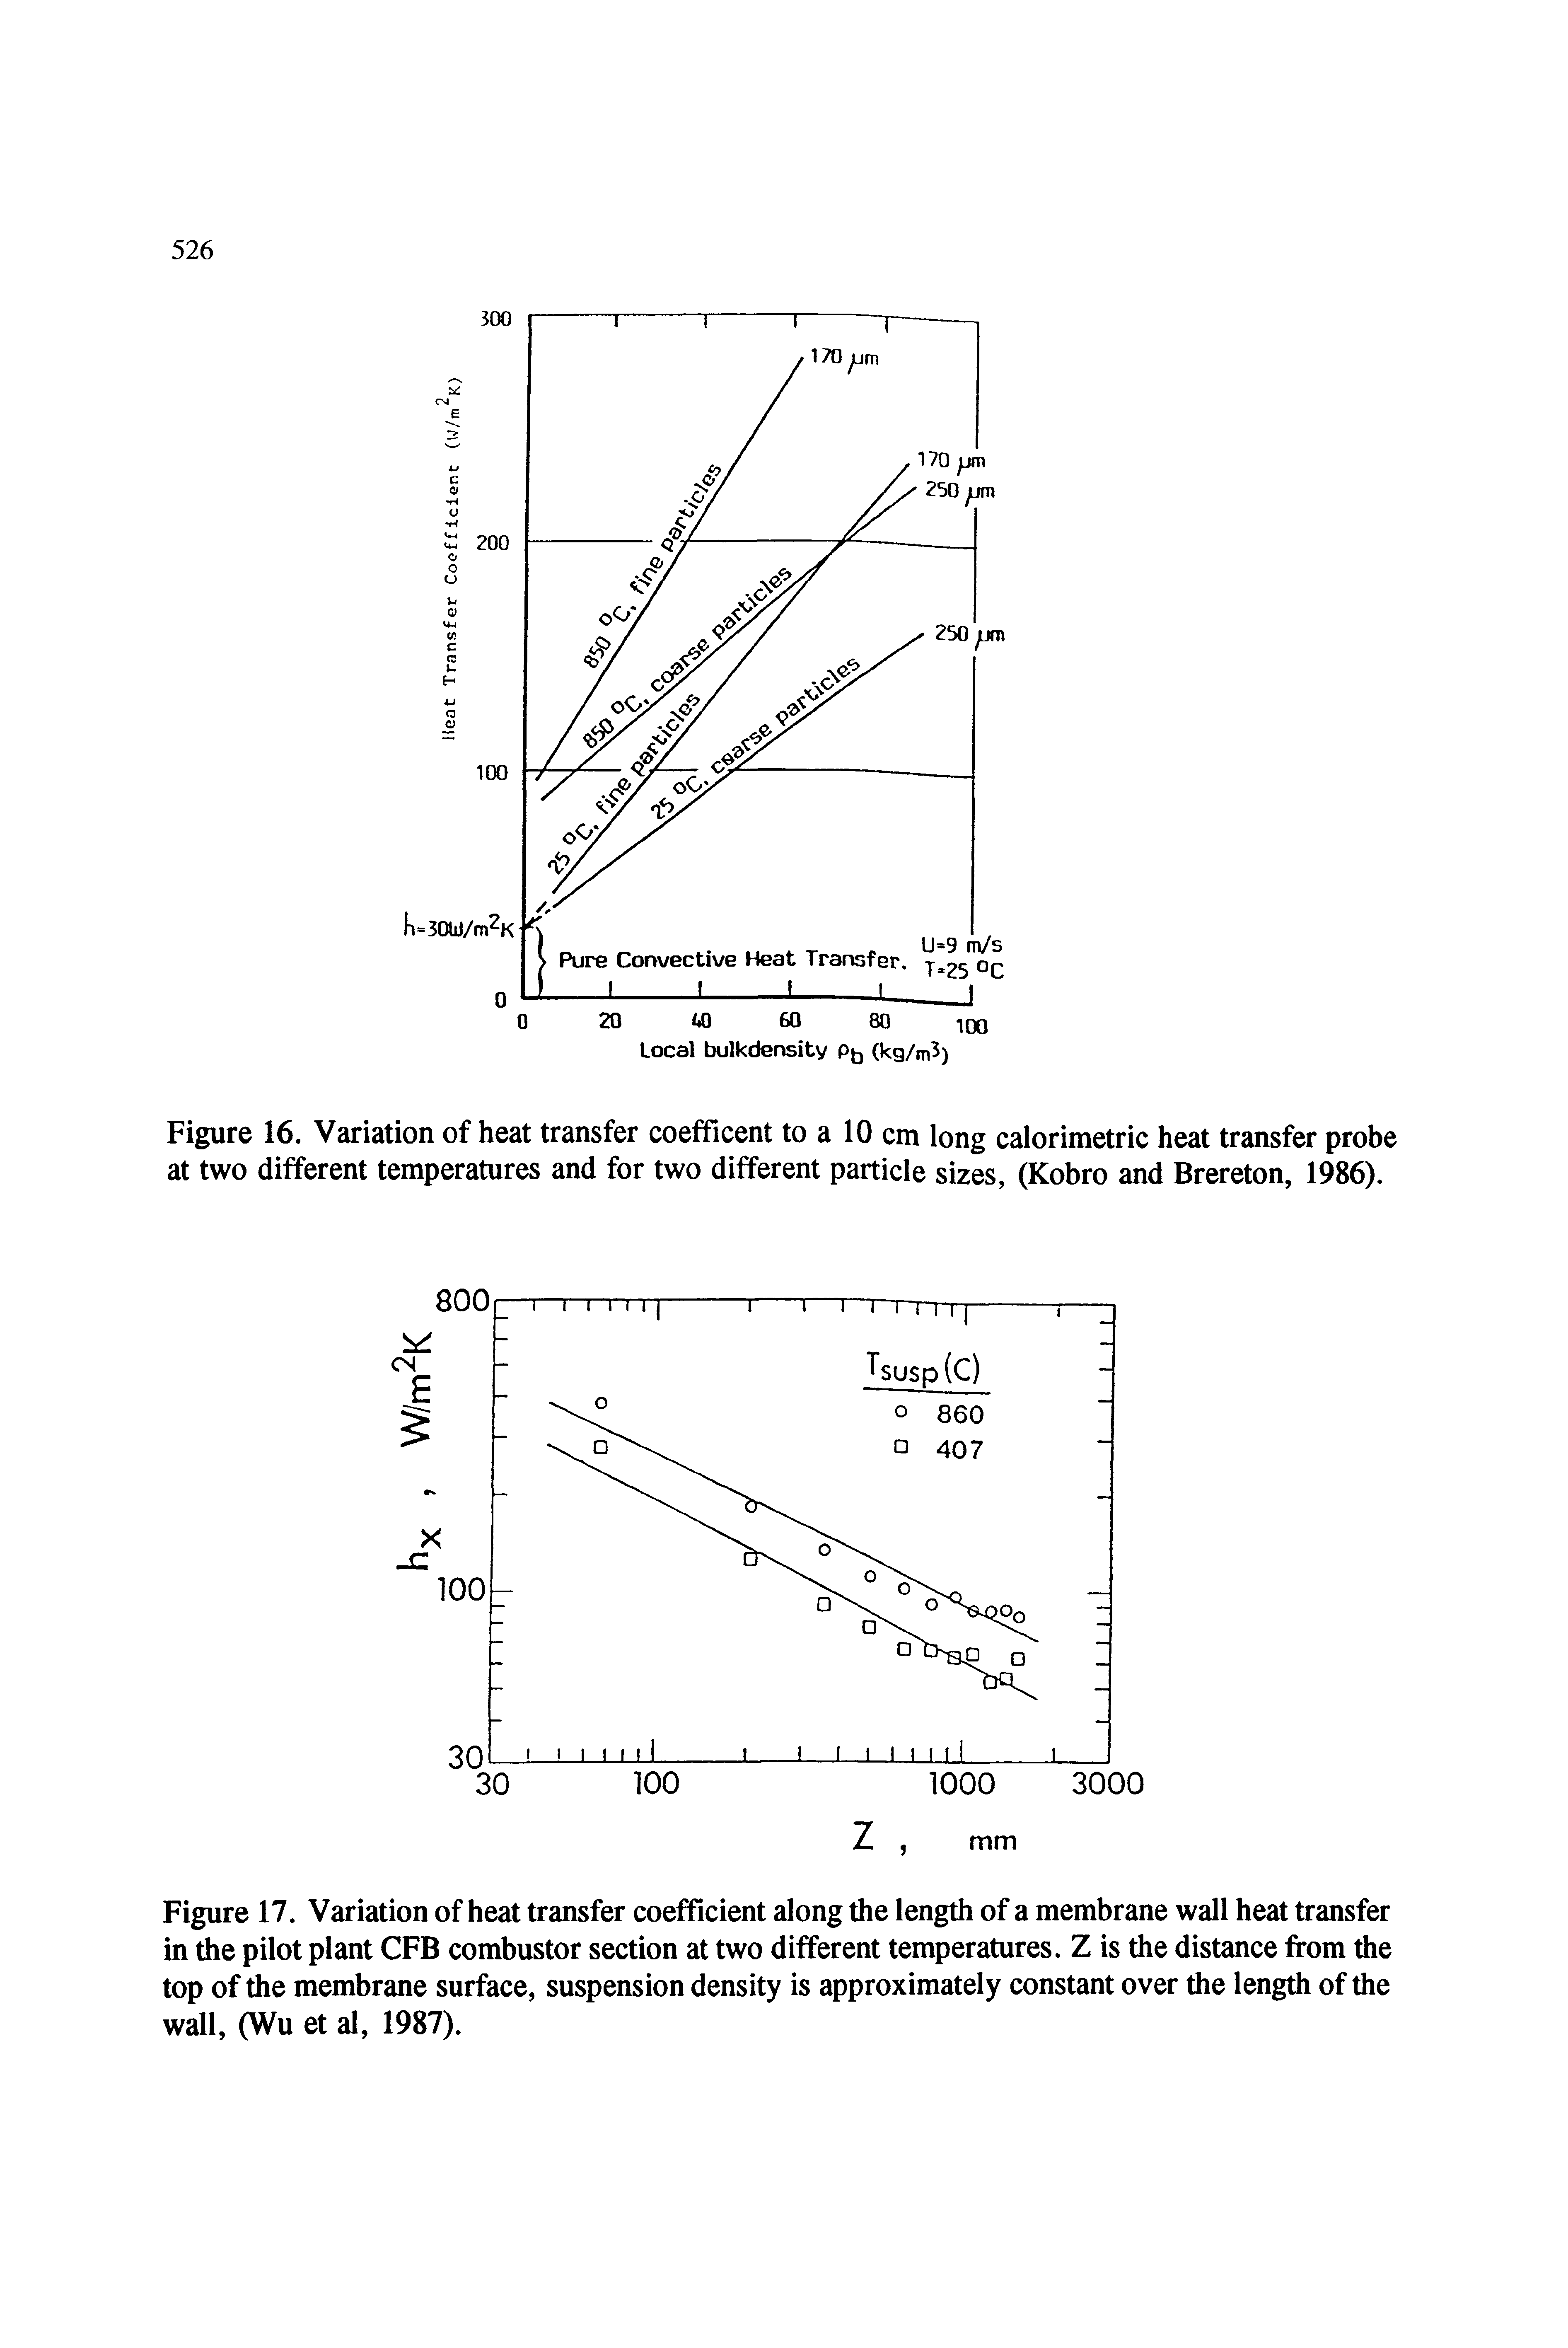 Figure 17. Variation of heat transfer coefficient along the length of a membrane wall heat transfer in the pilot plant CFB combustor section at two different temperatures. Z is the distance from the top of the membrane surface, suspension density is approximately constant over the length of the wall, (Wu et al, 1987).